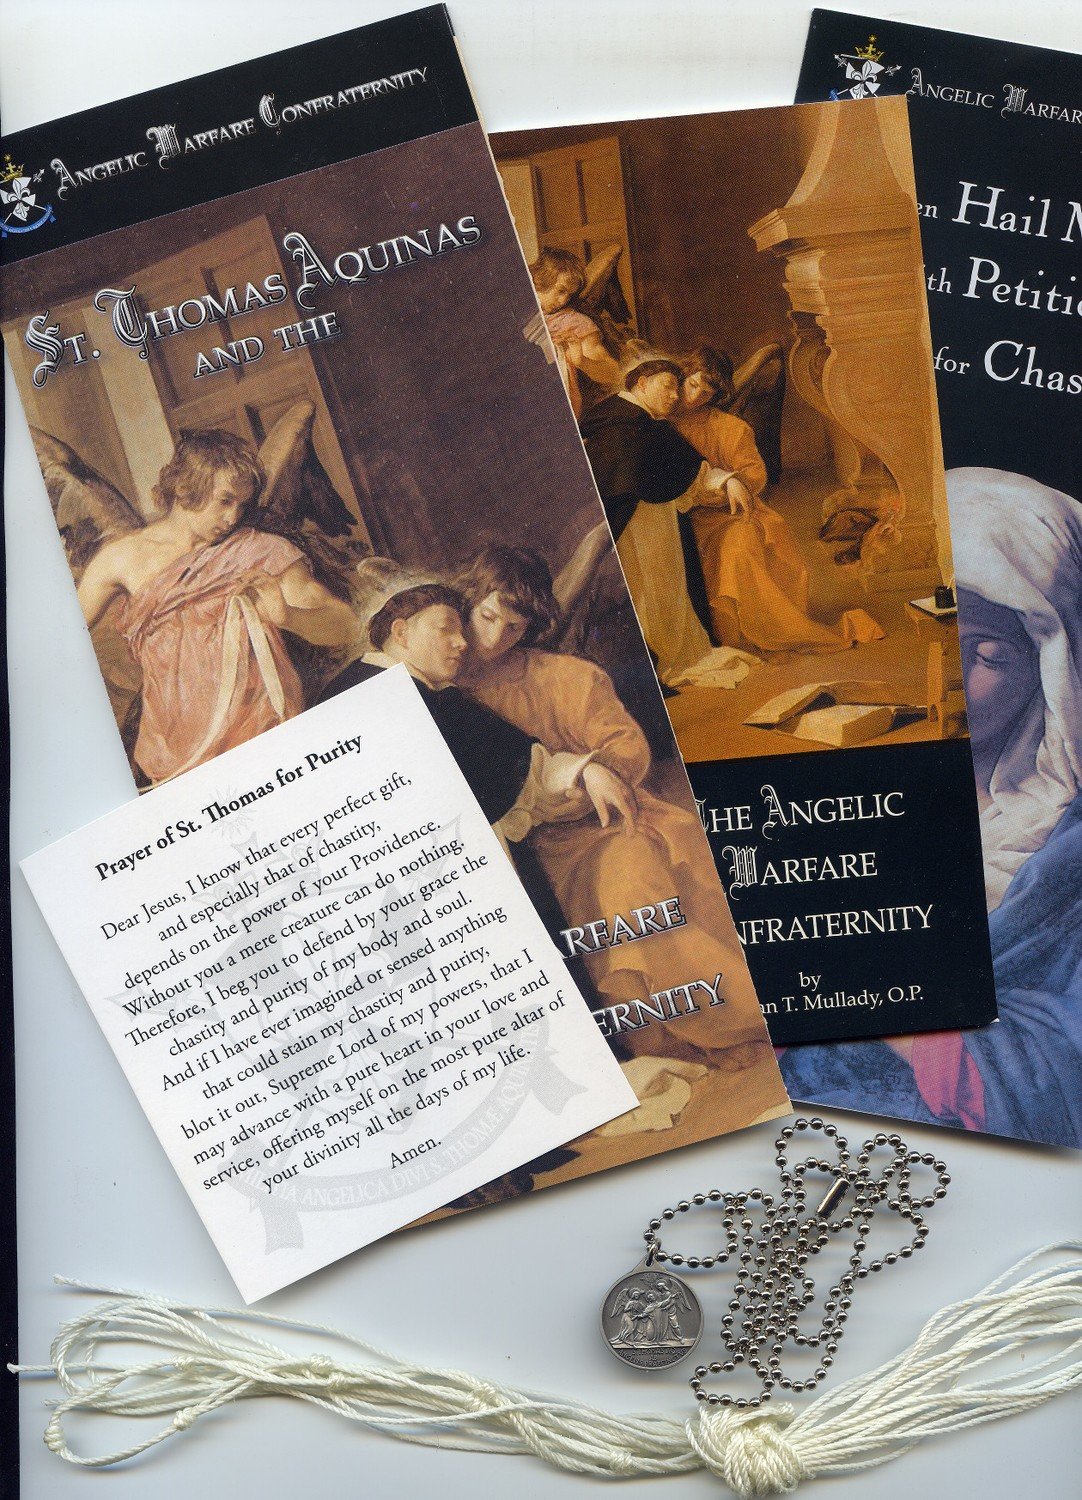 Angelic Warfare Confraternity Packet